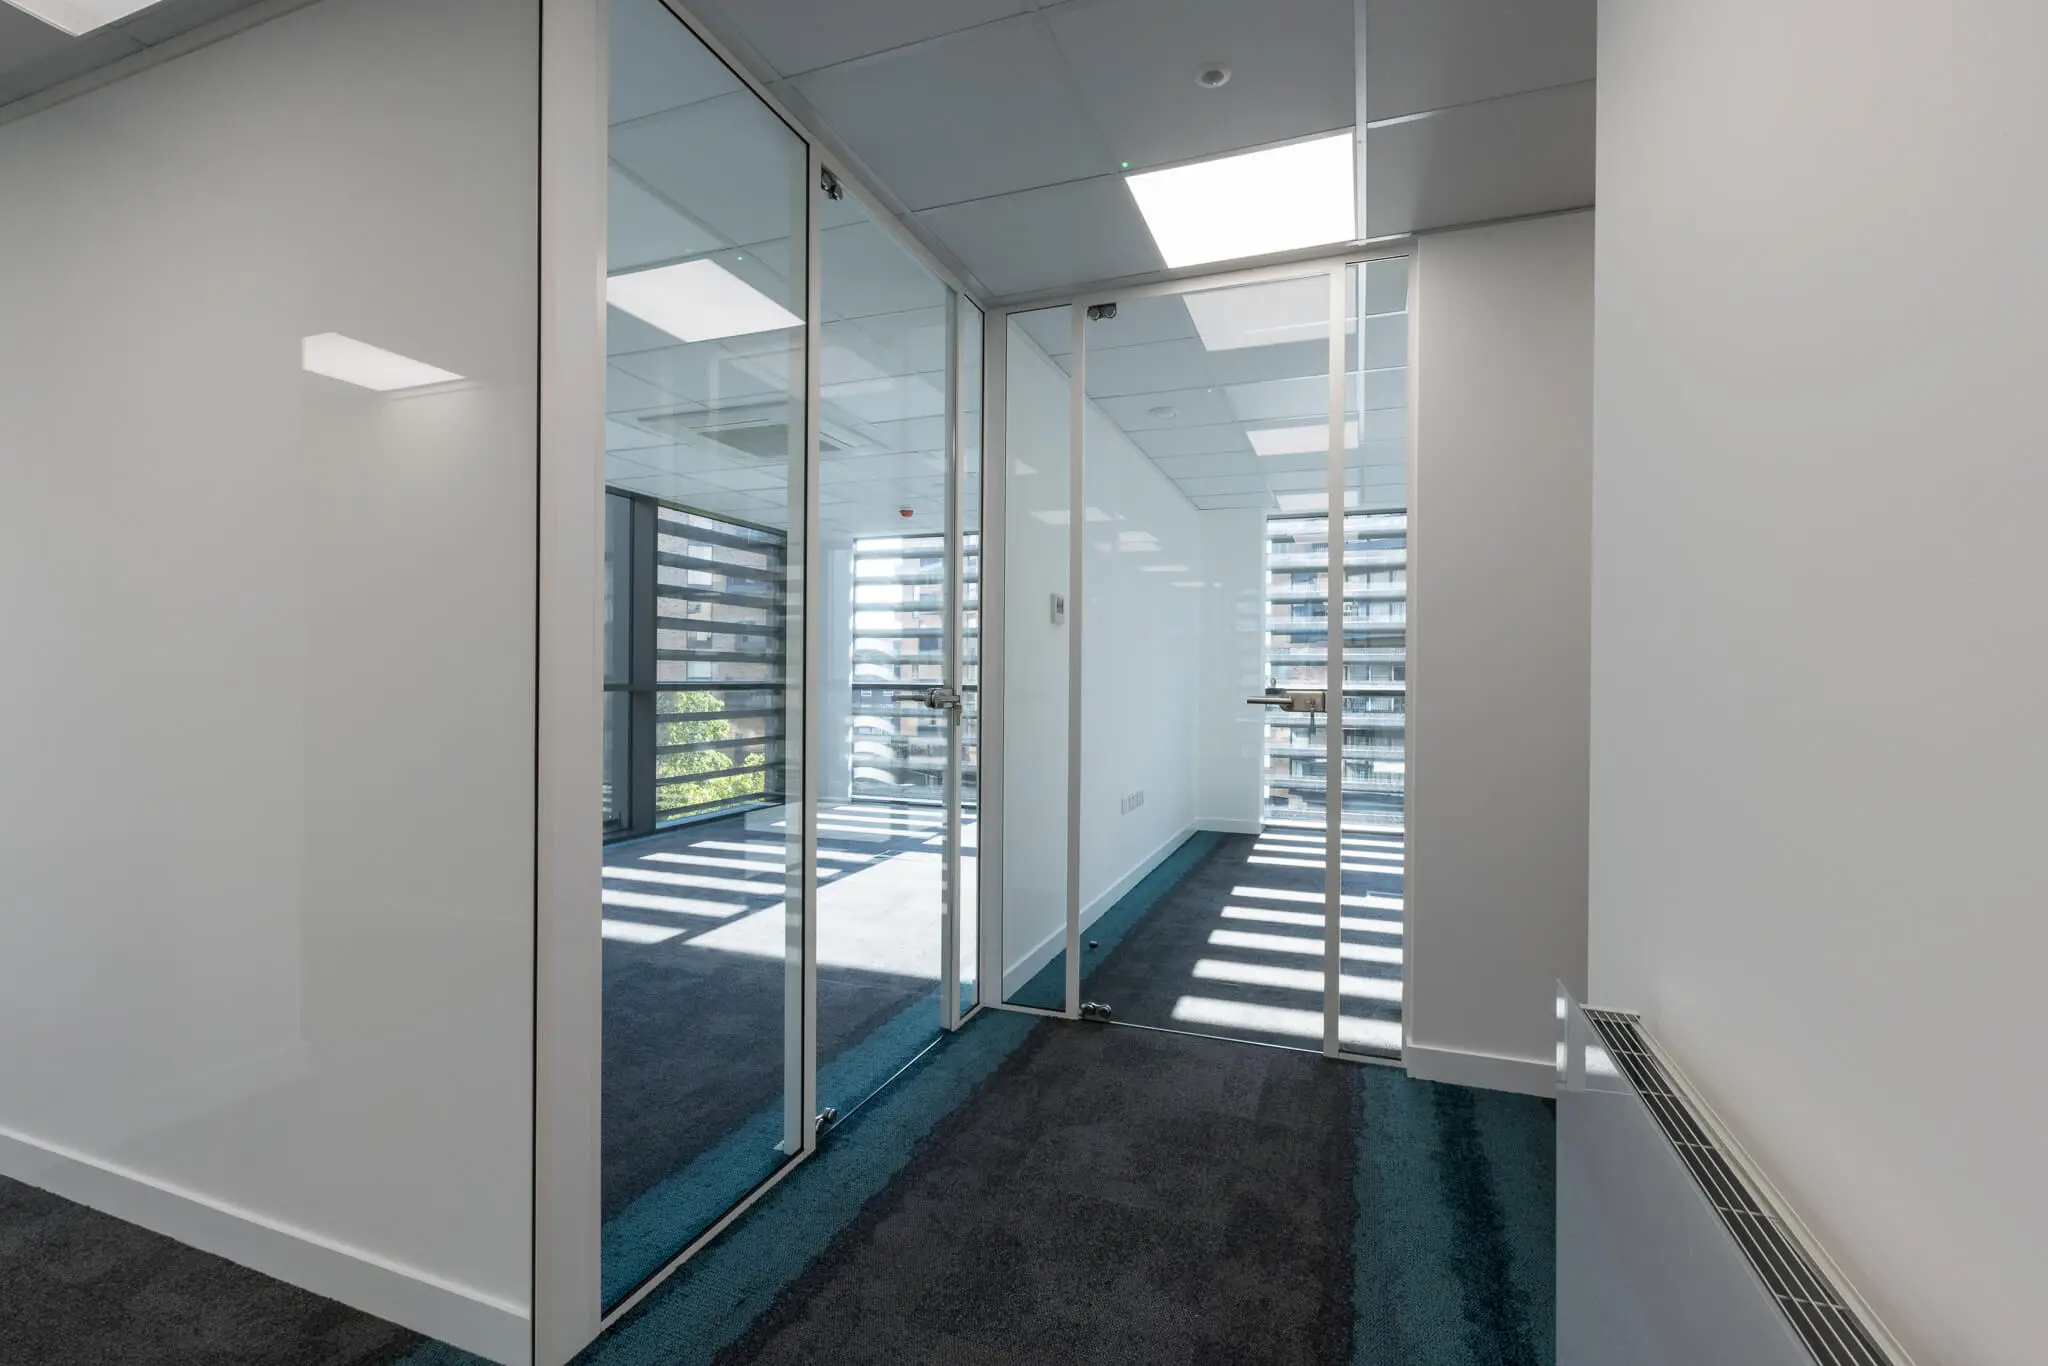 Office rooms divided with glass walls